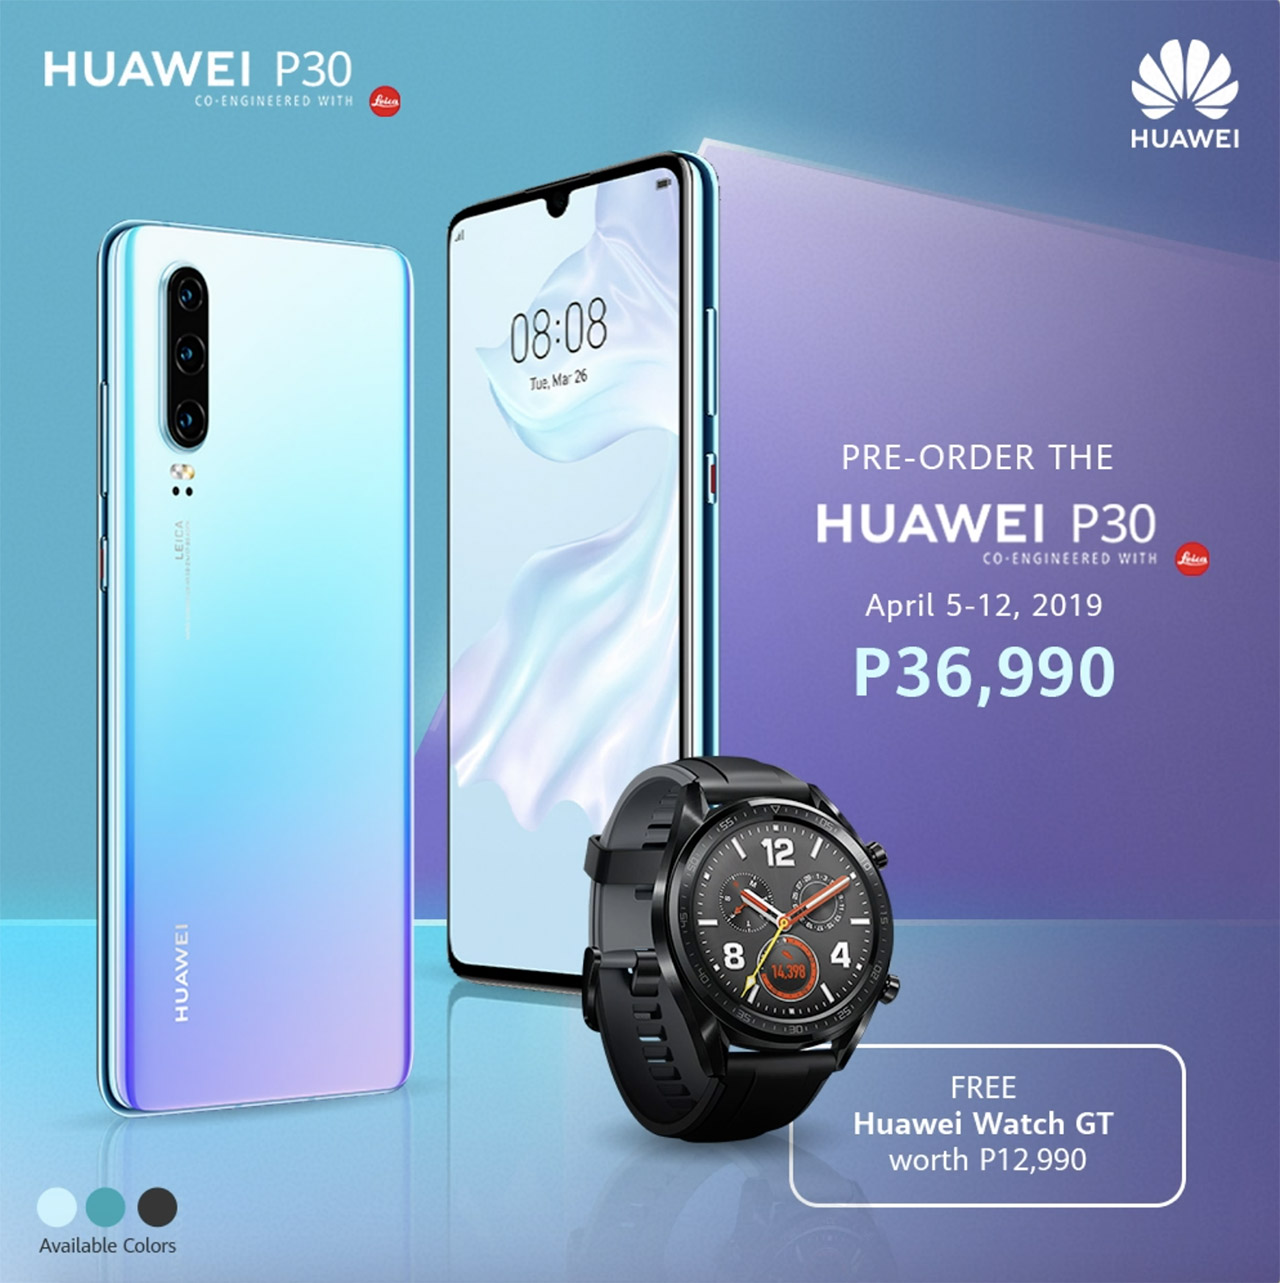 Huawei P30, P30 Pro, P30 Lite: Prices and availability in the